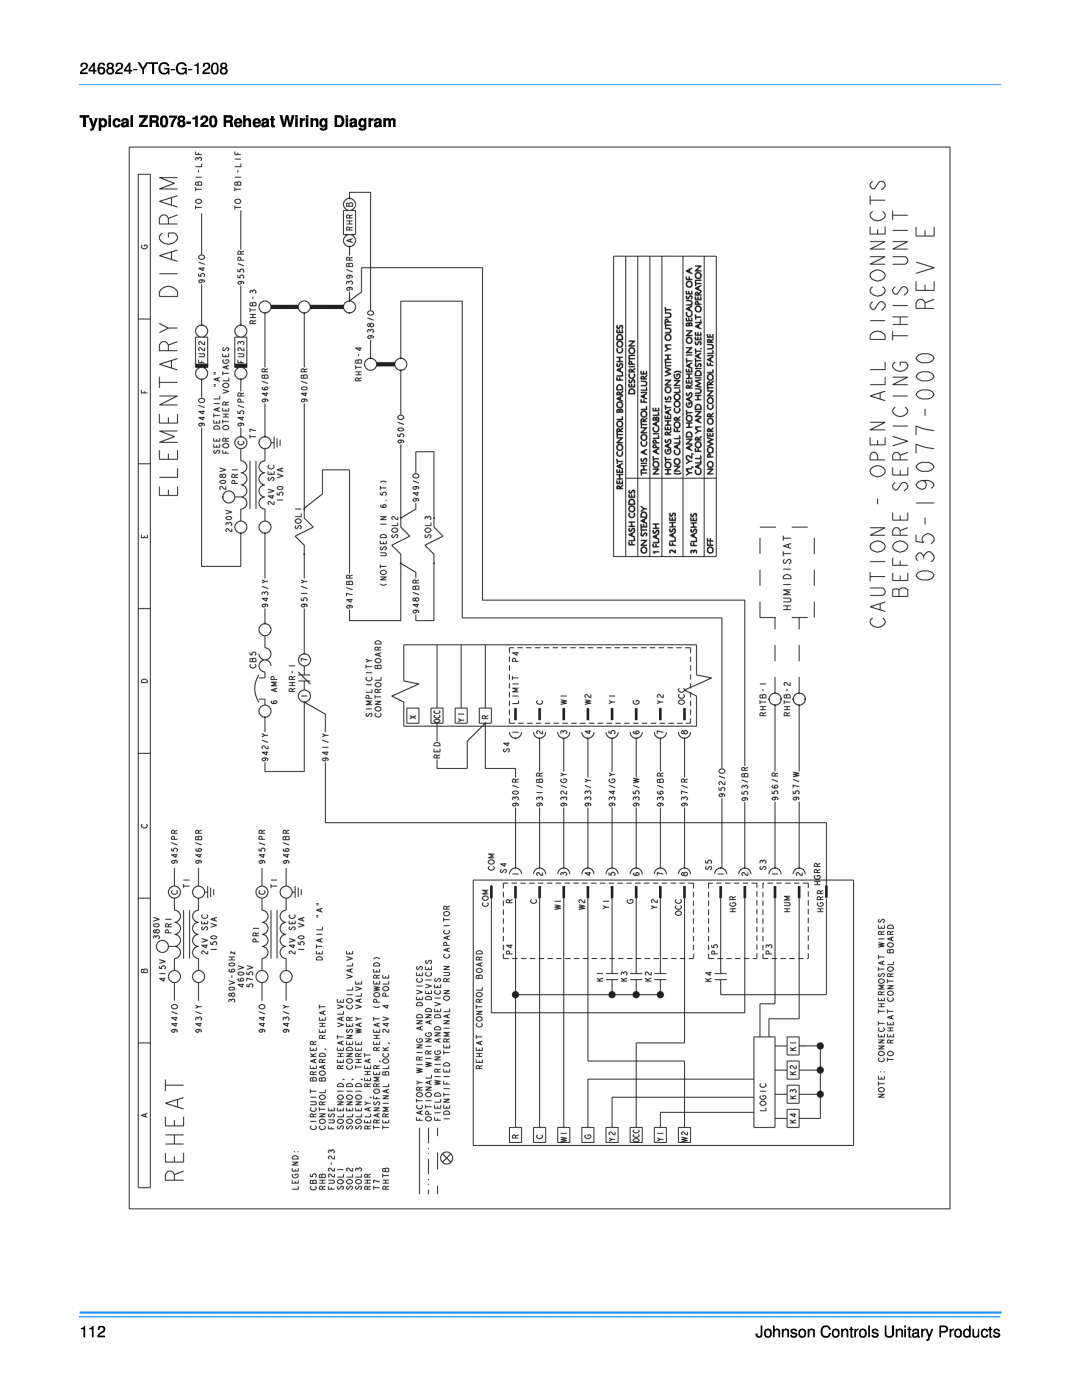 York R-410A manual Typical ZR078-120Reheat Wiring Diagram, Johnson Controls Unitary Products 